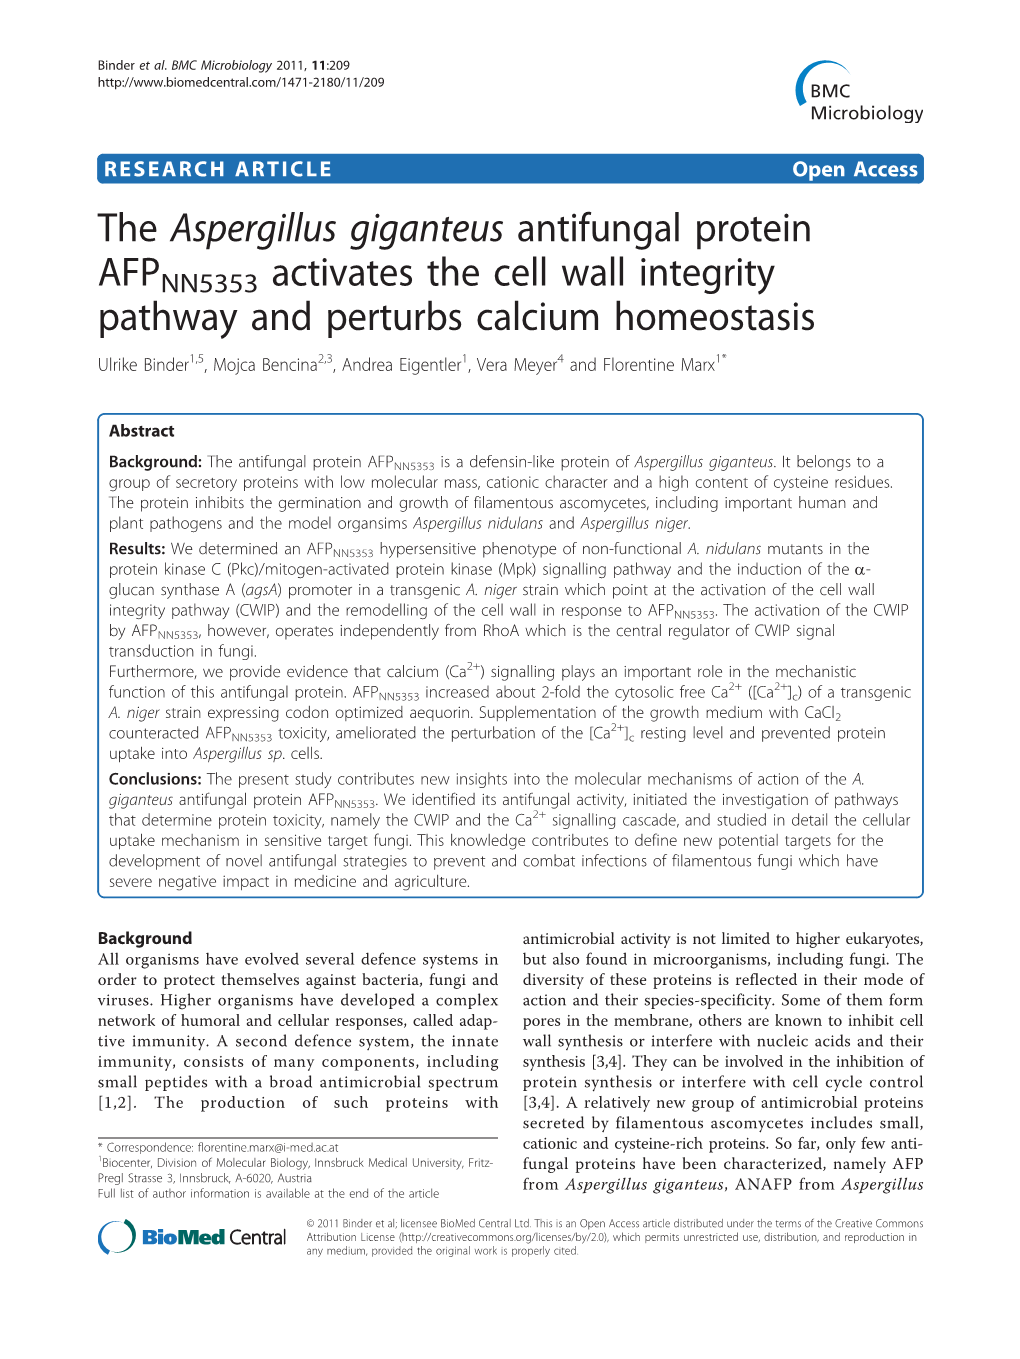 The Aspergillus Giganteus Antifungal Protein AFPNN5353 Activates the Cell Wall Integrity Pathway and Perturbs Calcium Homeostasi